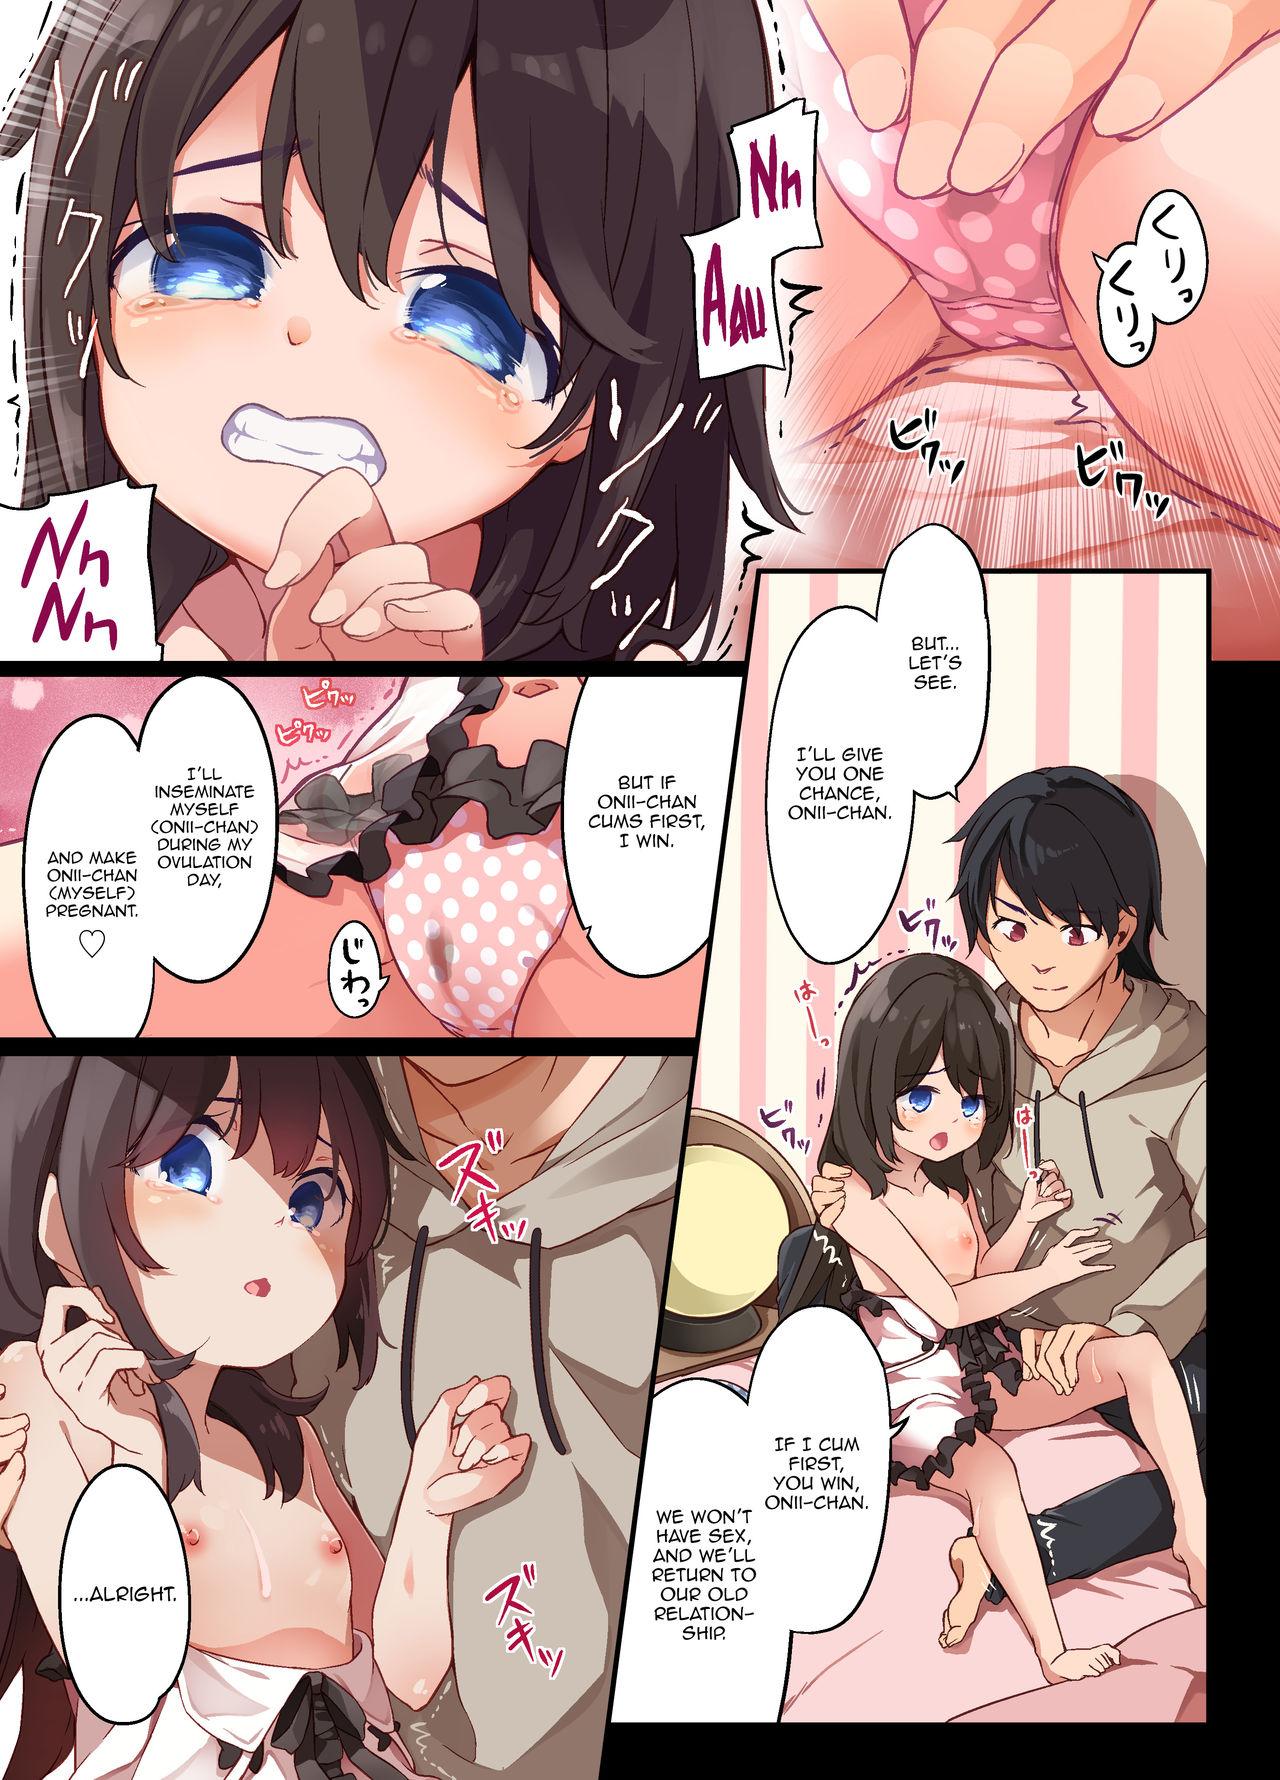 A Yandere Little Sister Wants to Be Impregnated by Her Big Brother, So She Switches Bodies With Him and They Have Baby-Making Sex 16